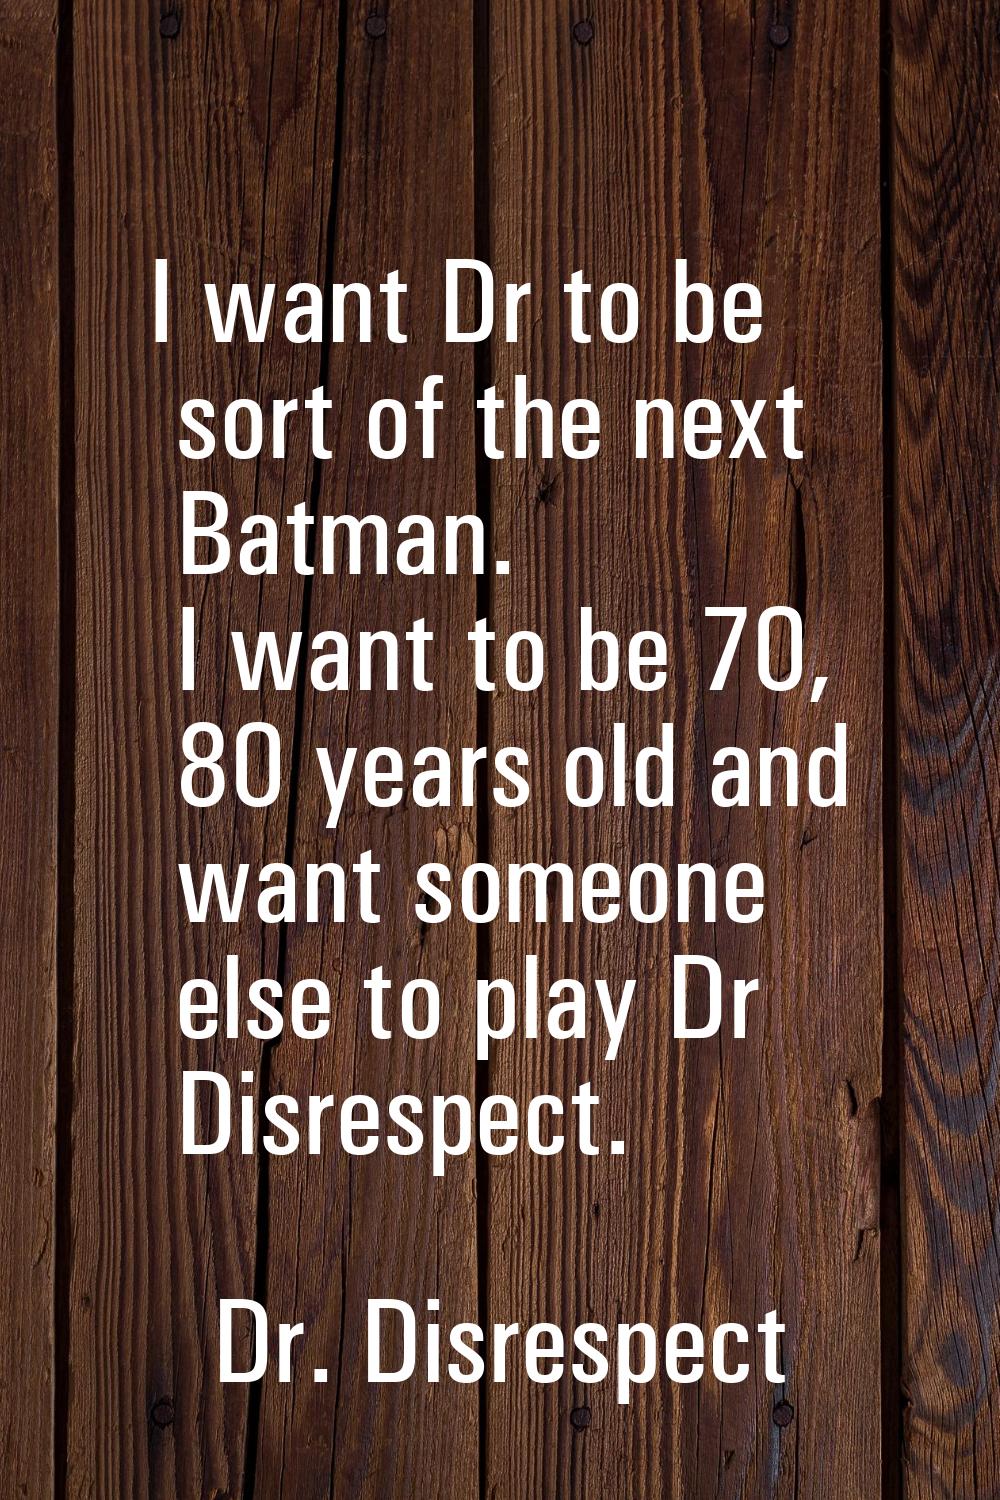 I want Dr to be sort of the next Batman. I want to be 70, 80 years old and want someone else to pla